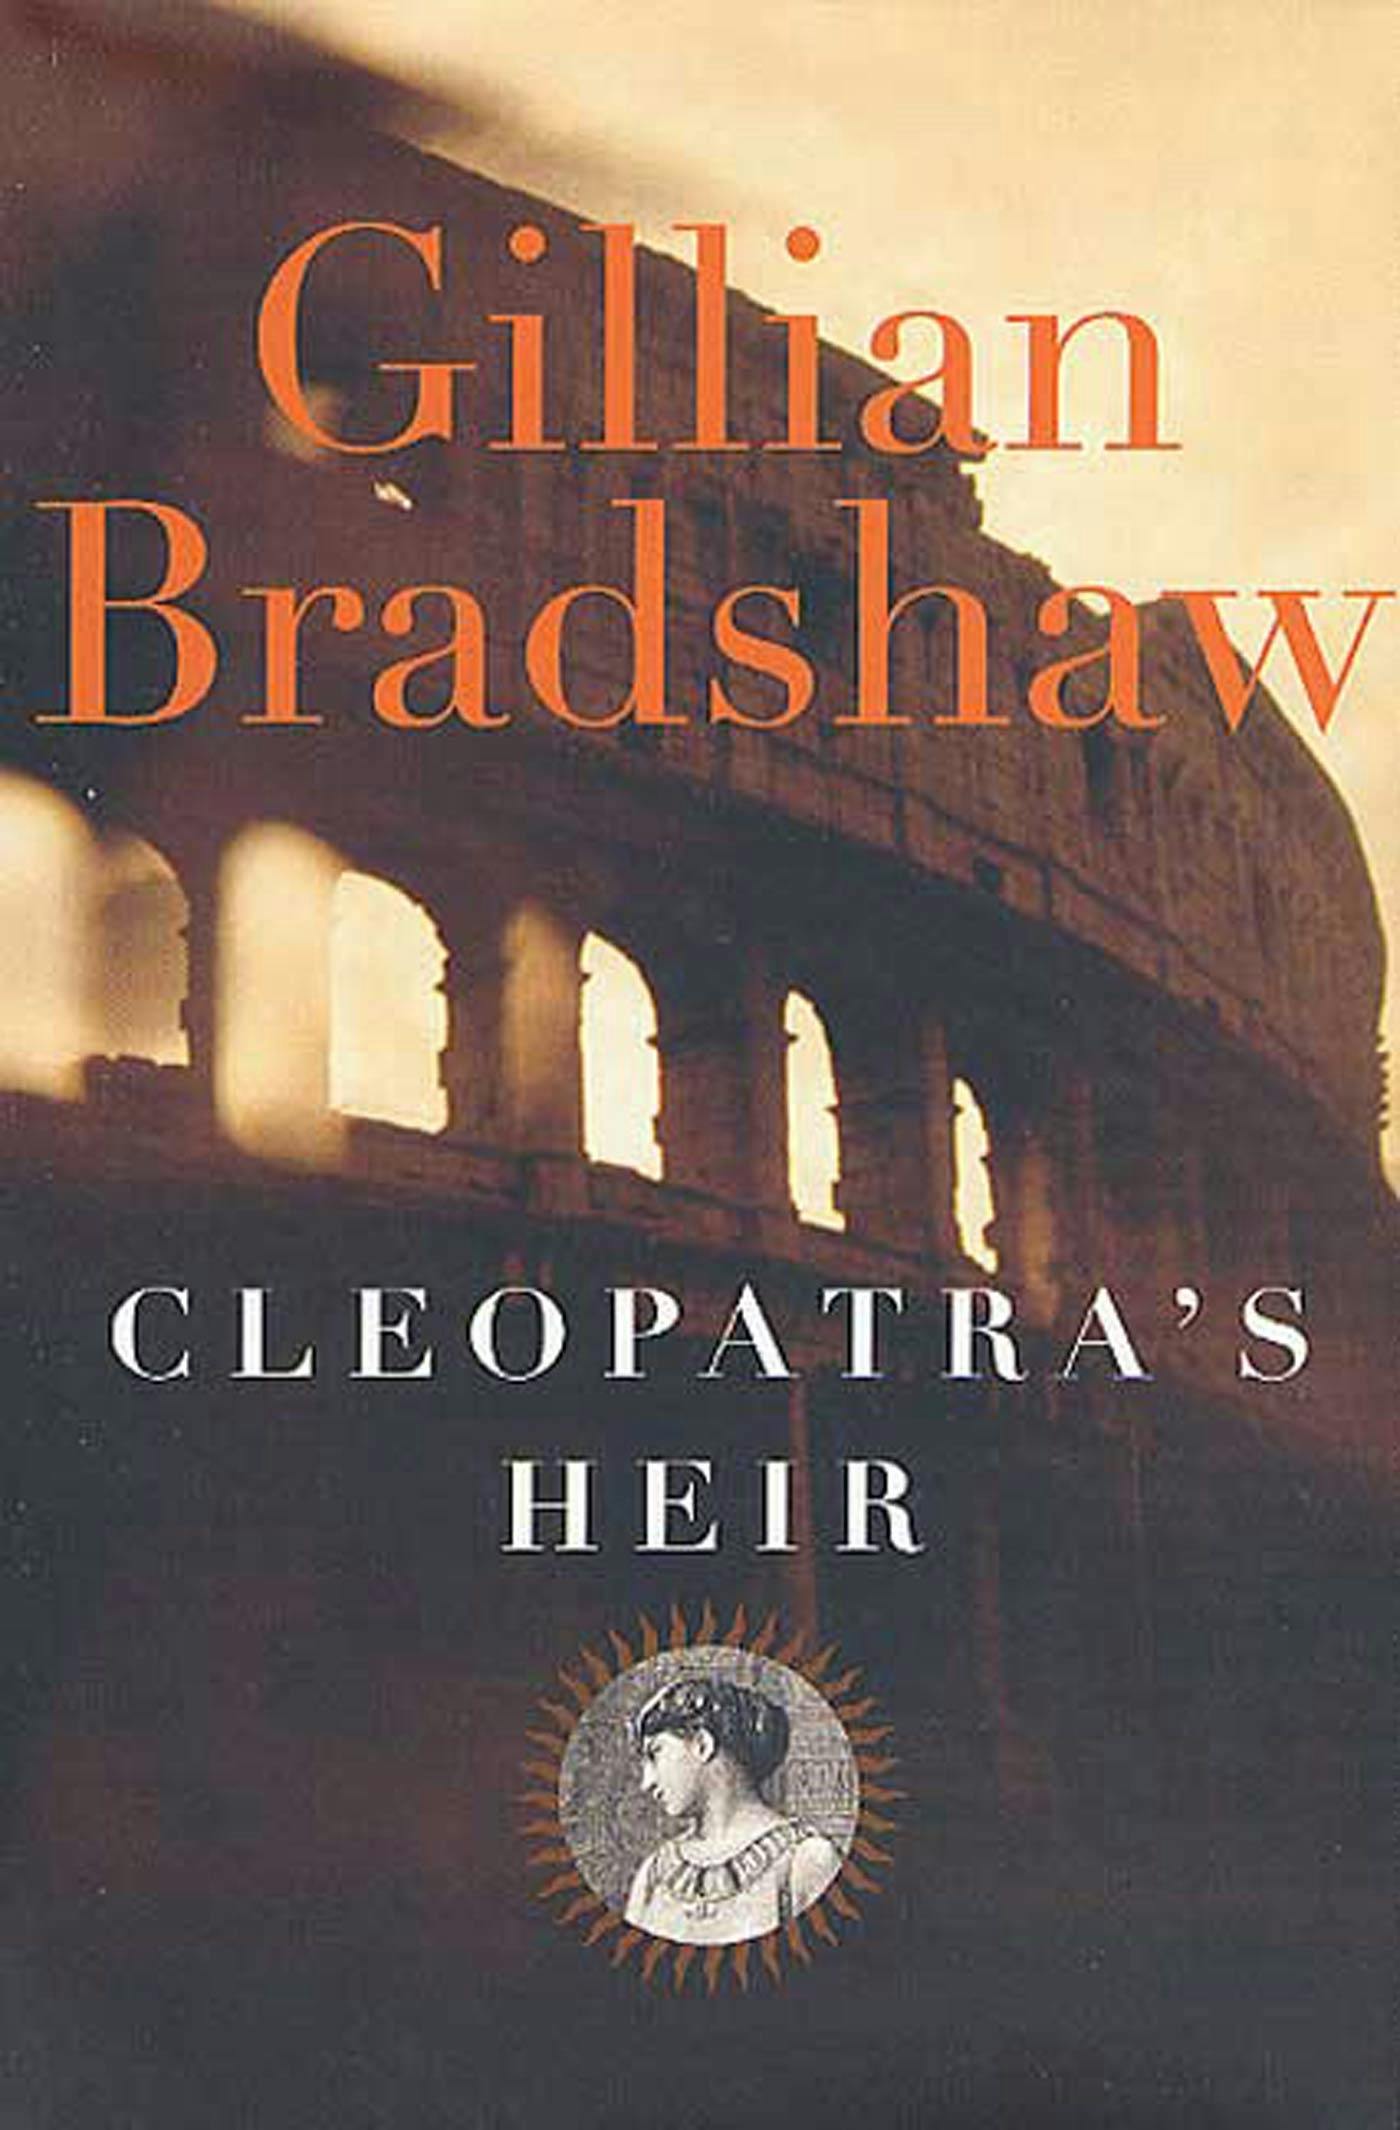 Cover for the book titled as: Cleopatra's Heir